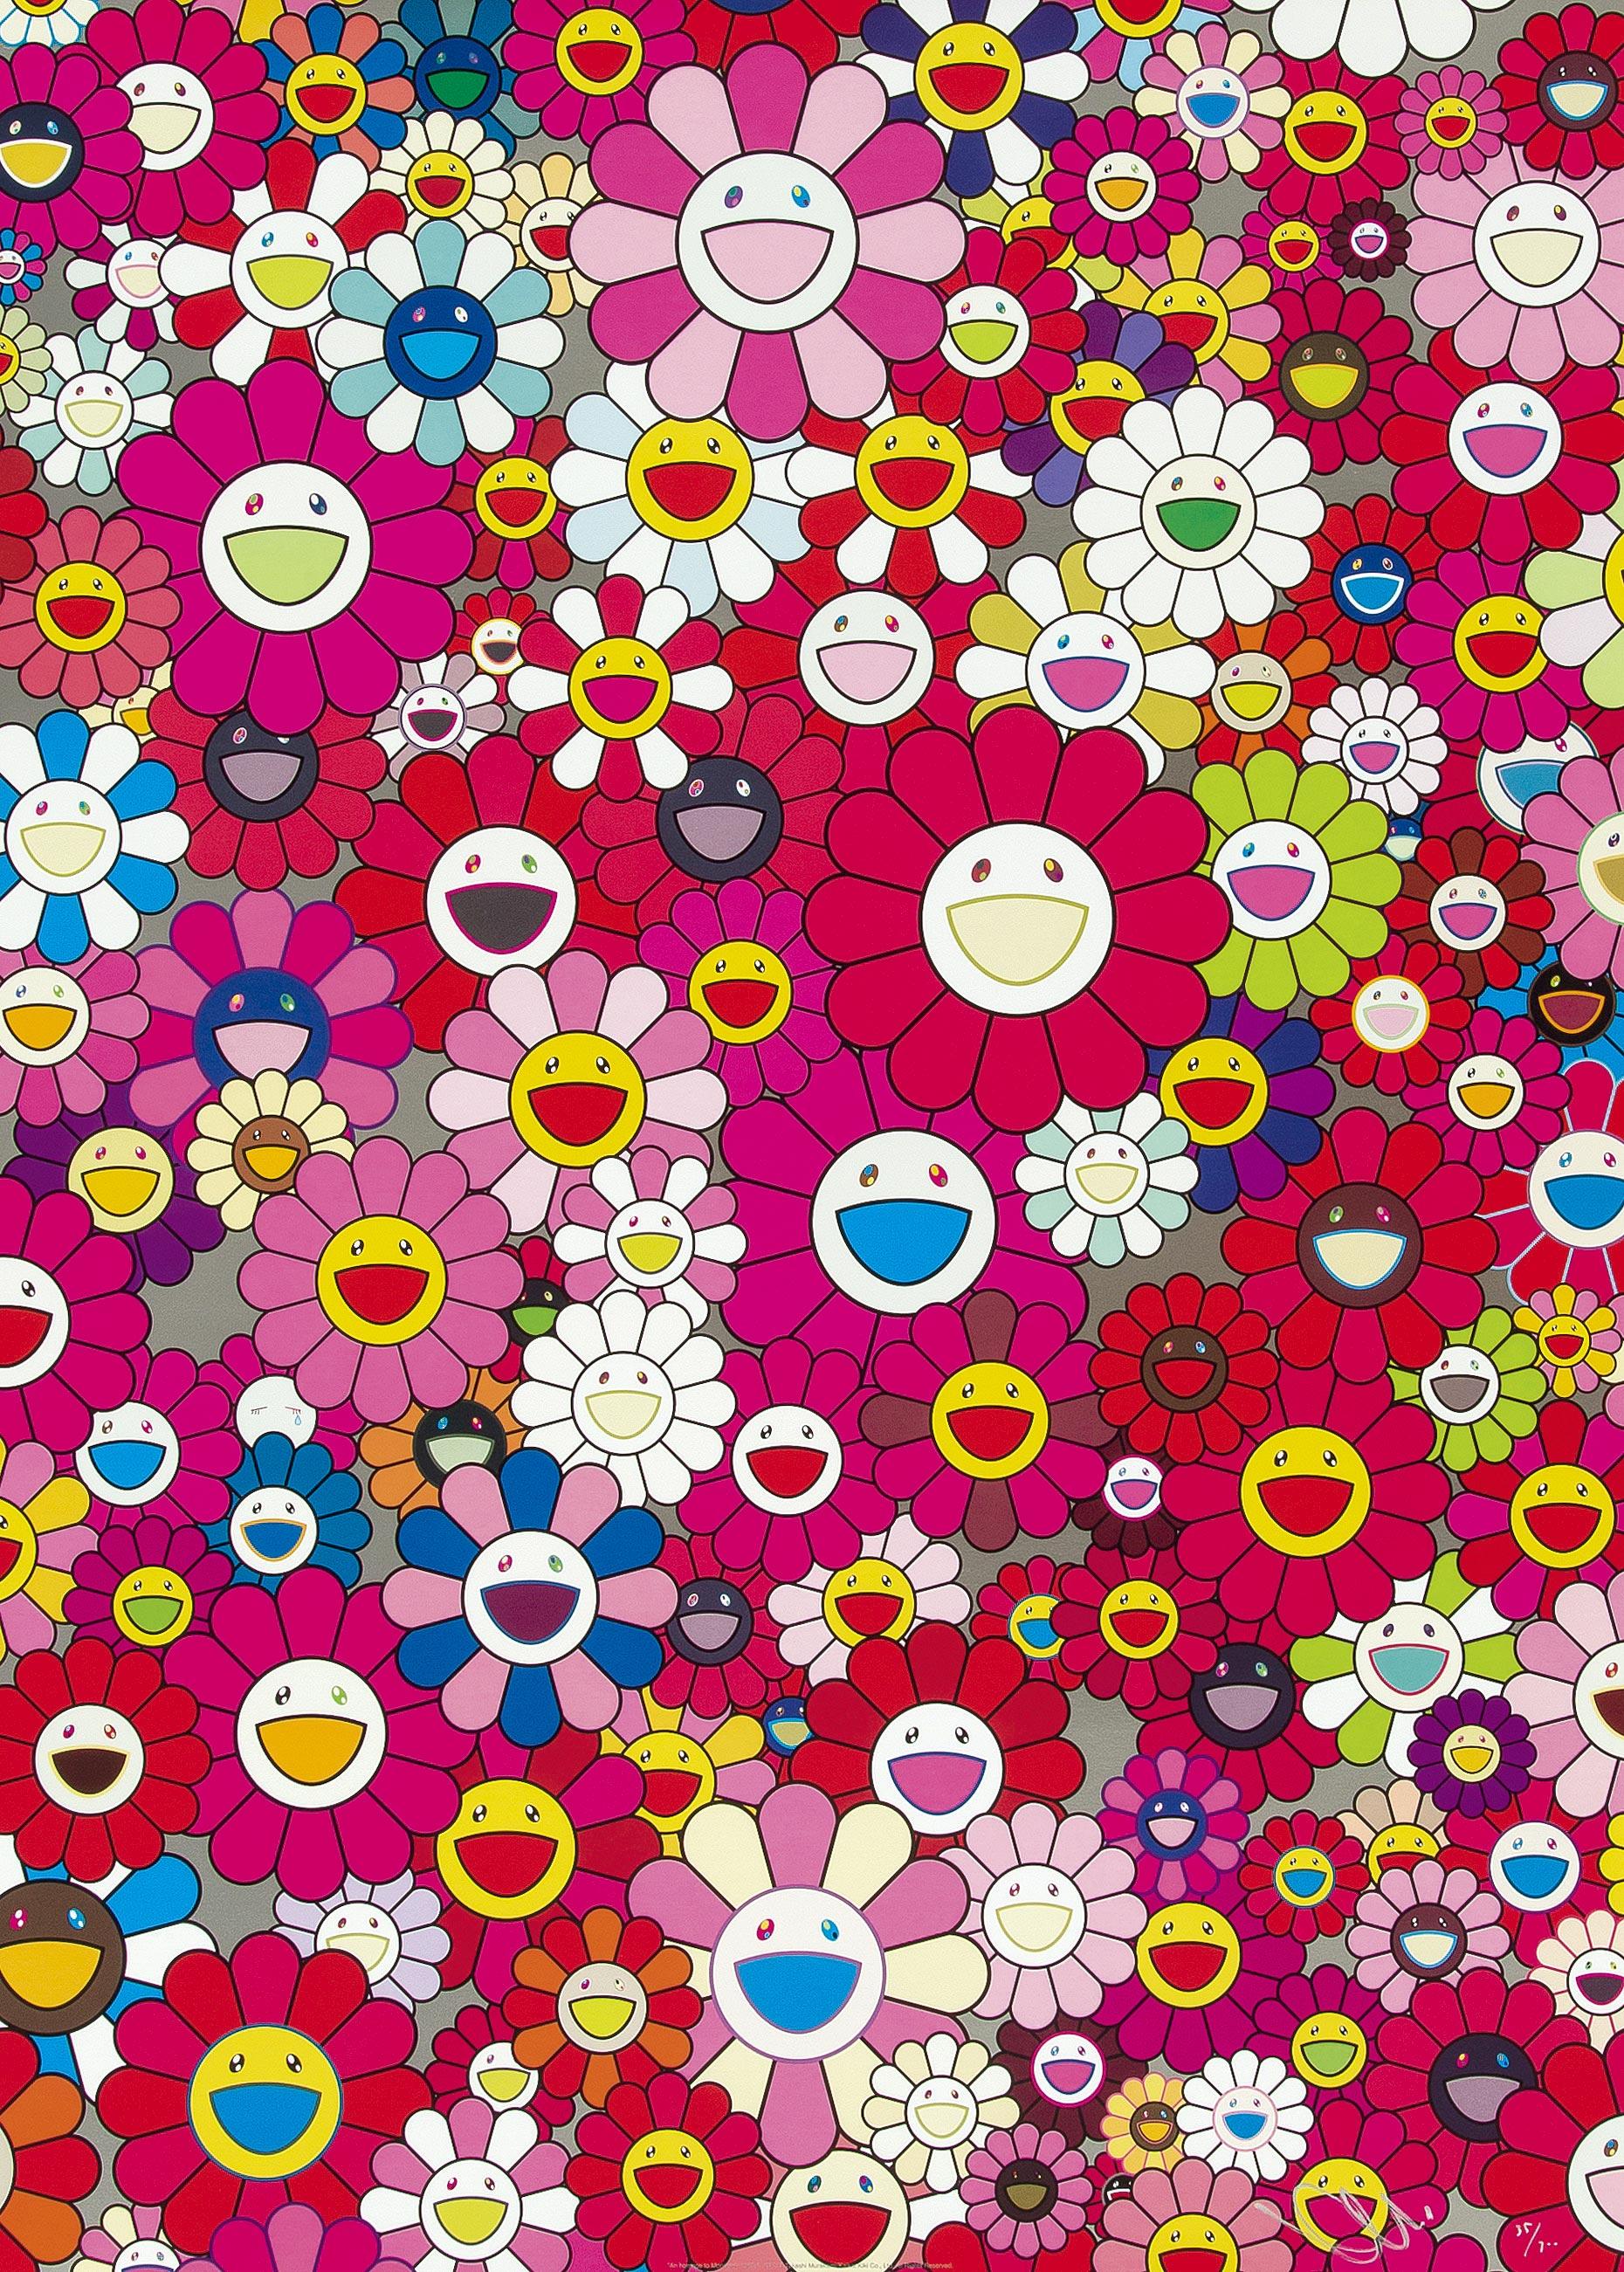 An Homage to Monopink, 1960A, 2012 by Takashi Murakami
Offset print, numbered and signed by the artist
27 1/10 × 20 9/10 in
68.8 × 53 cm
Edition  35/300

Takashi Murakami is best known for his contemporary combination of fine art and pop culture. He